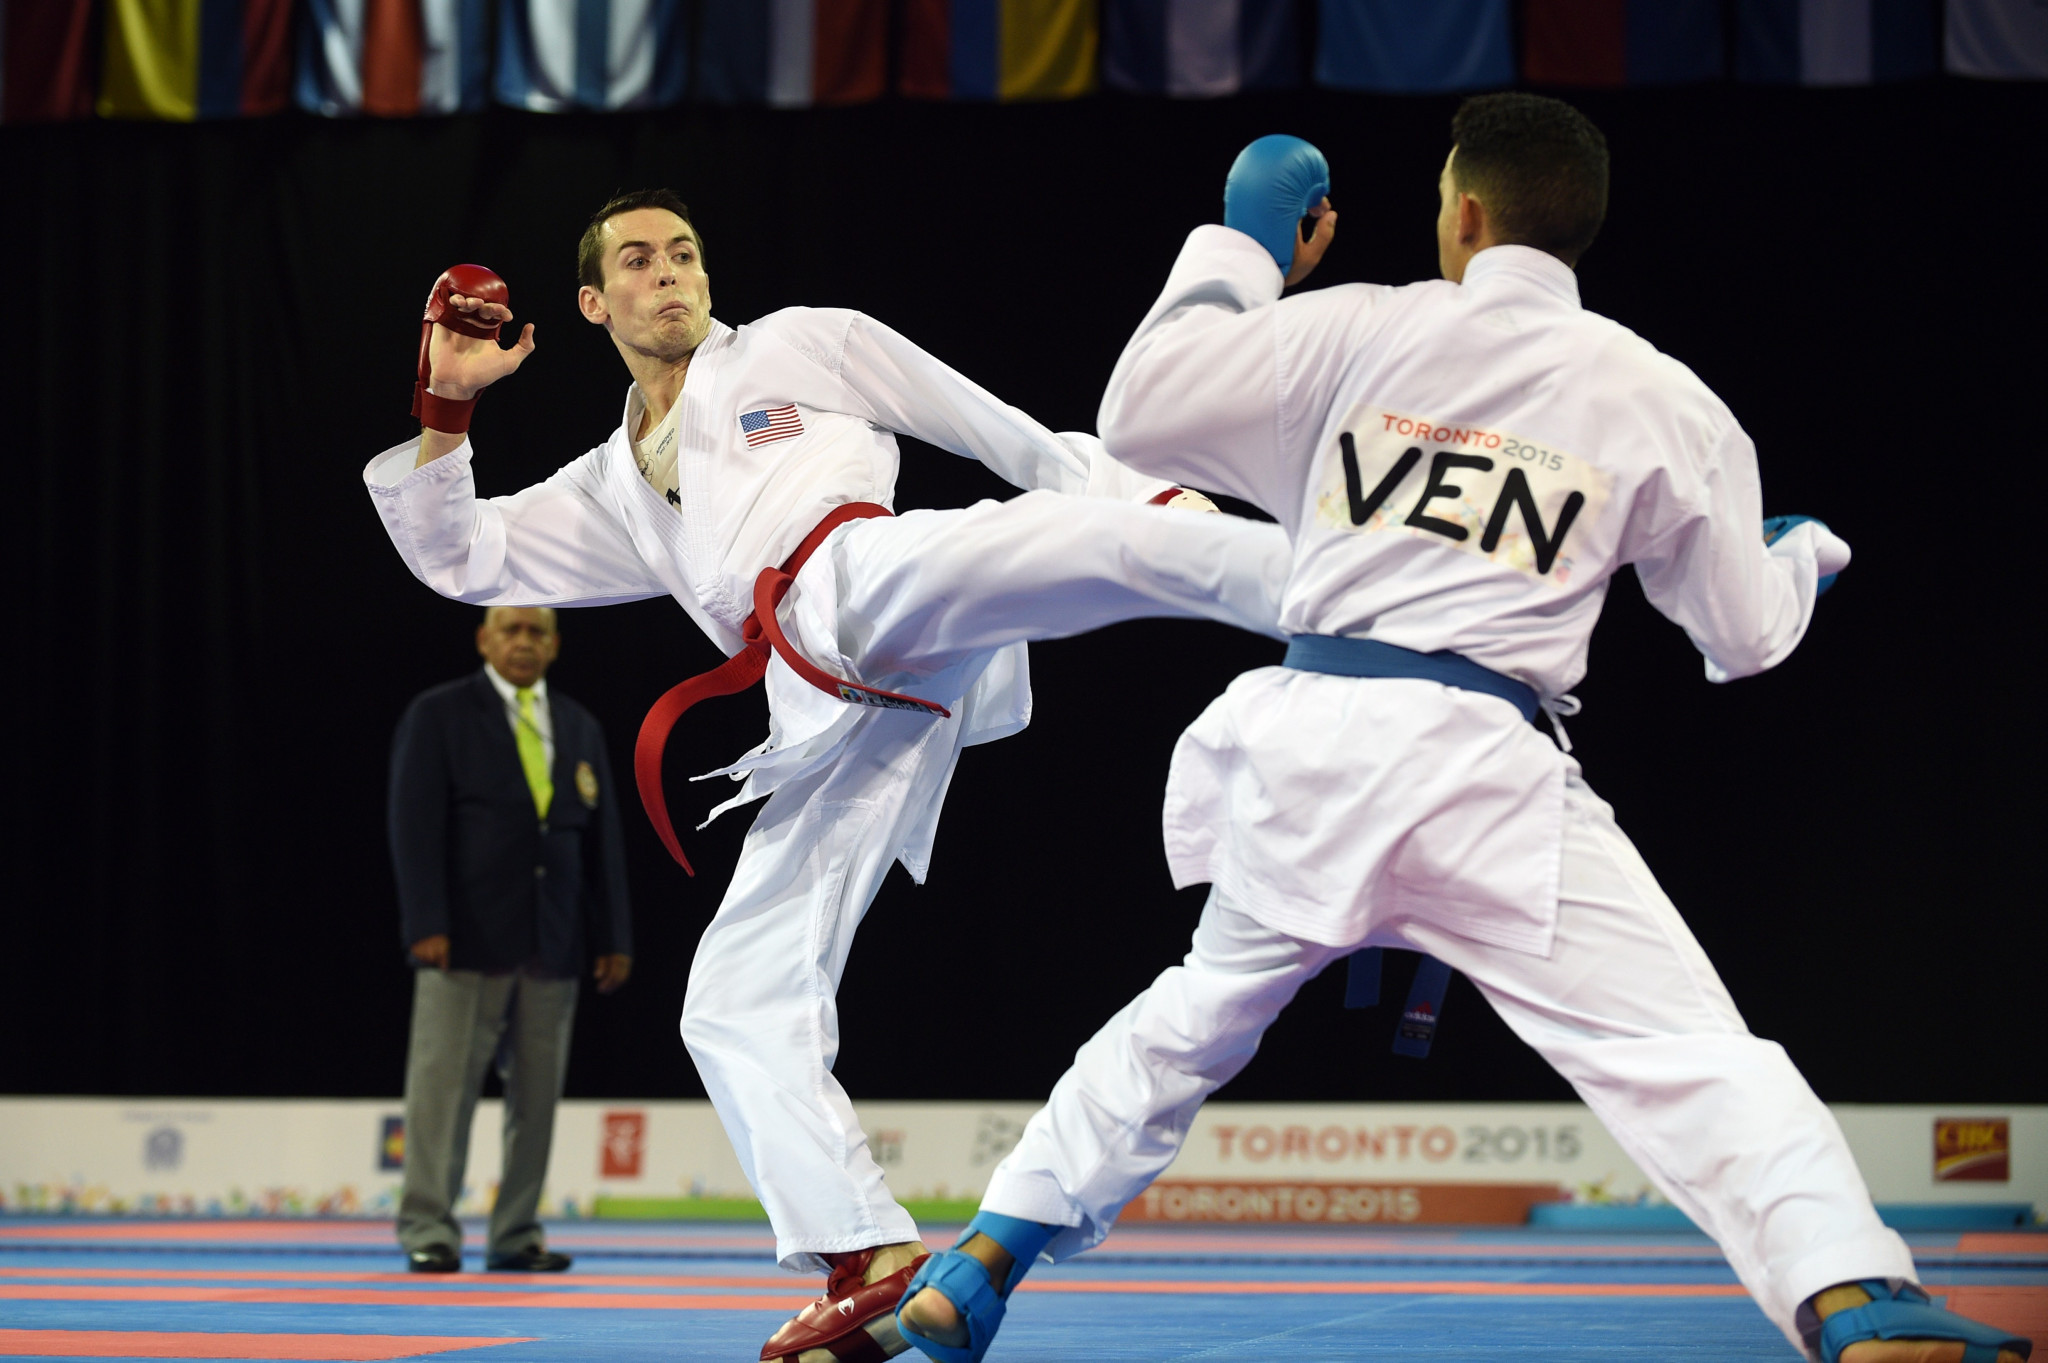 Thomas Scott was one of the United States' three gold medallists on the opening day of the 2018 Pan American Karate Federation Senior Championships in Santiago ©Getty Images